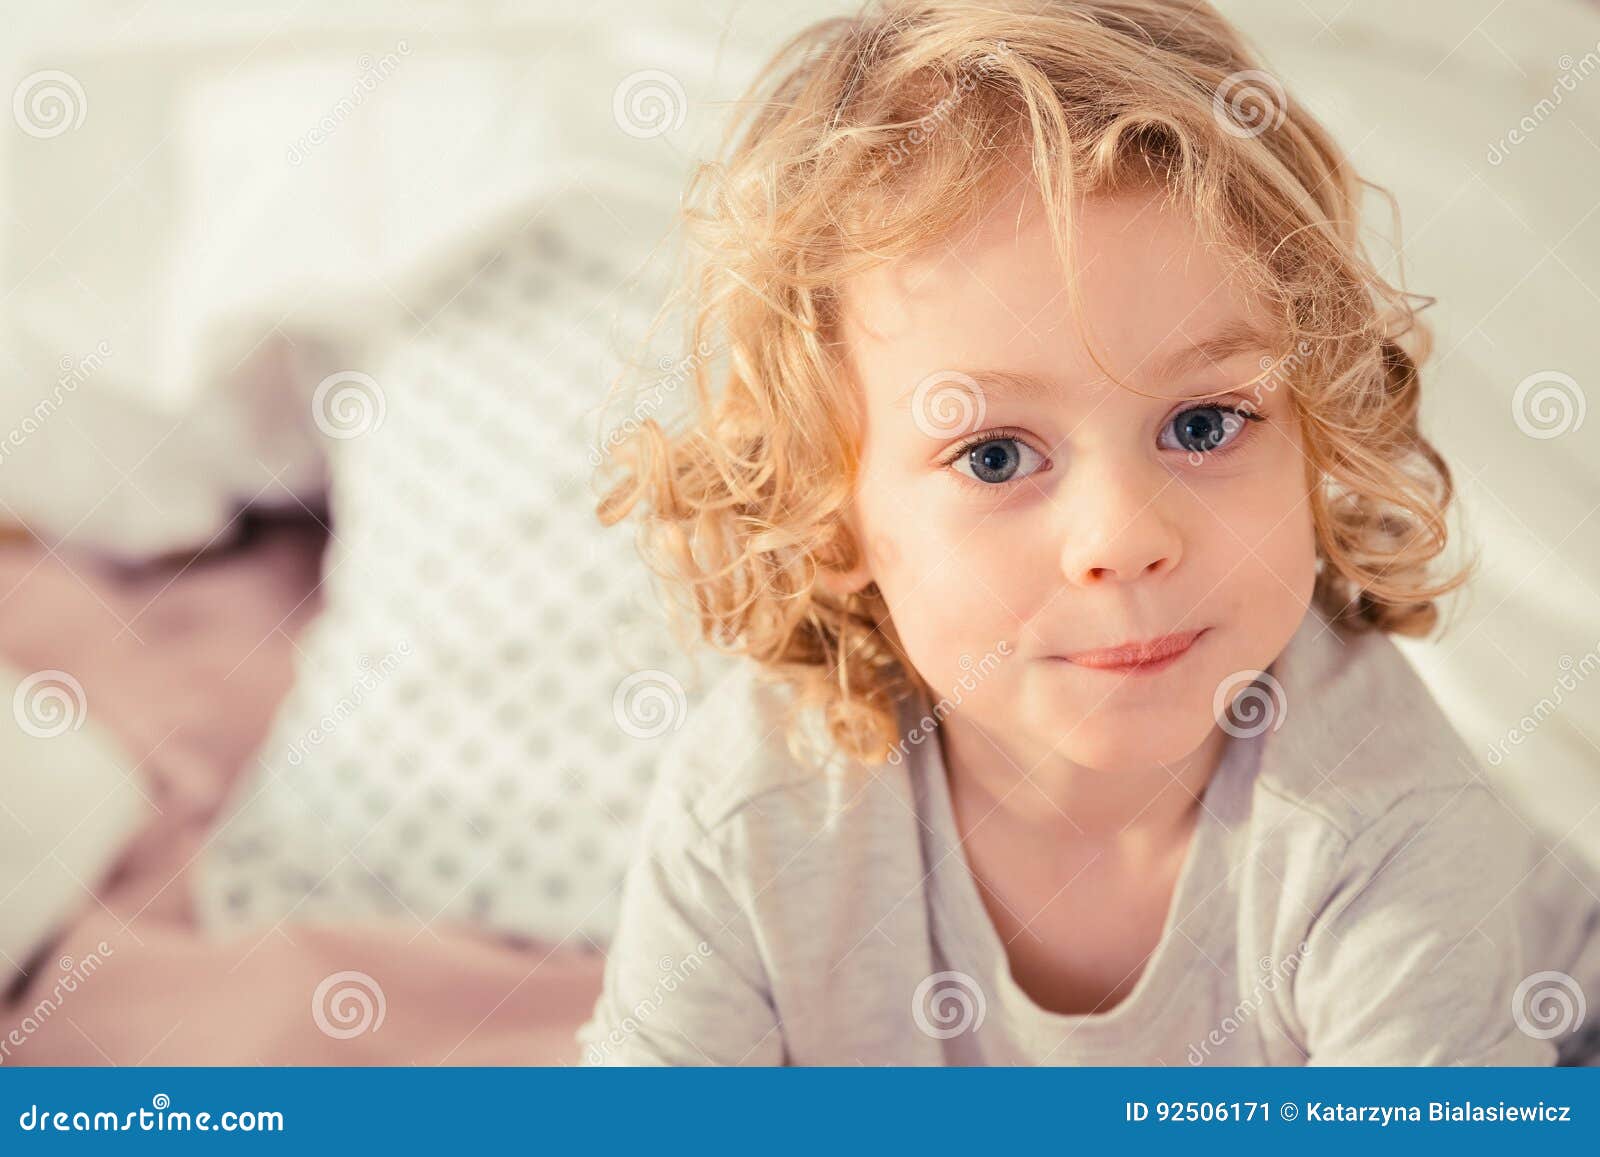 Little Boy With Curly Hair Stock Image Image Of Blonde 92506171